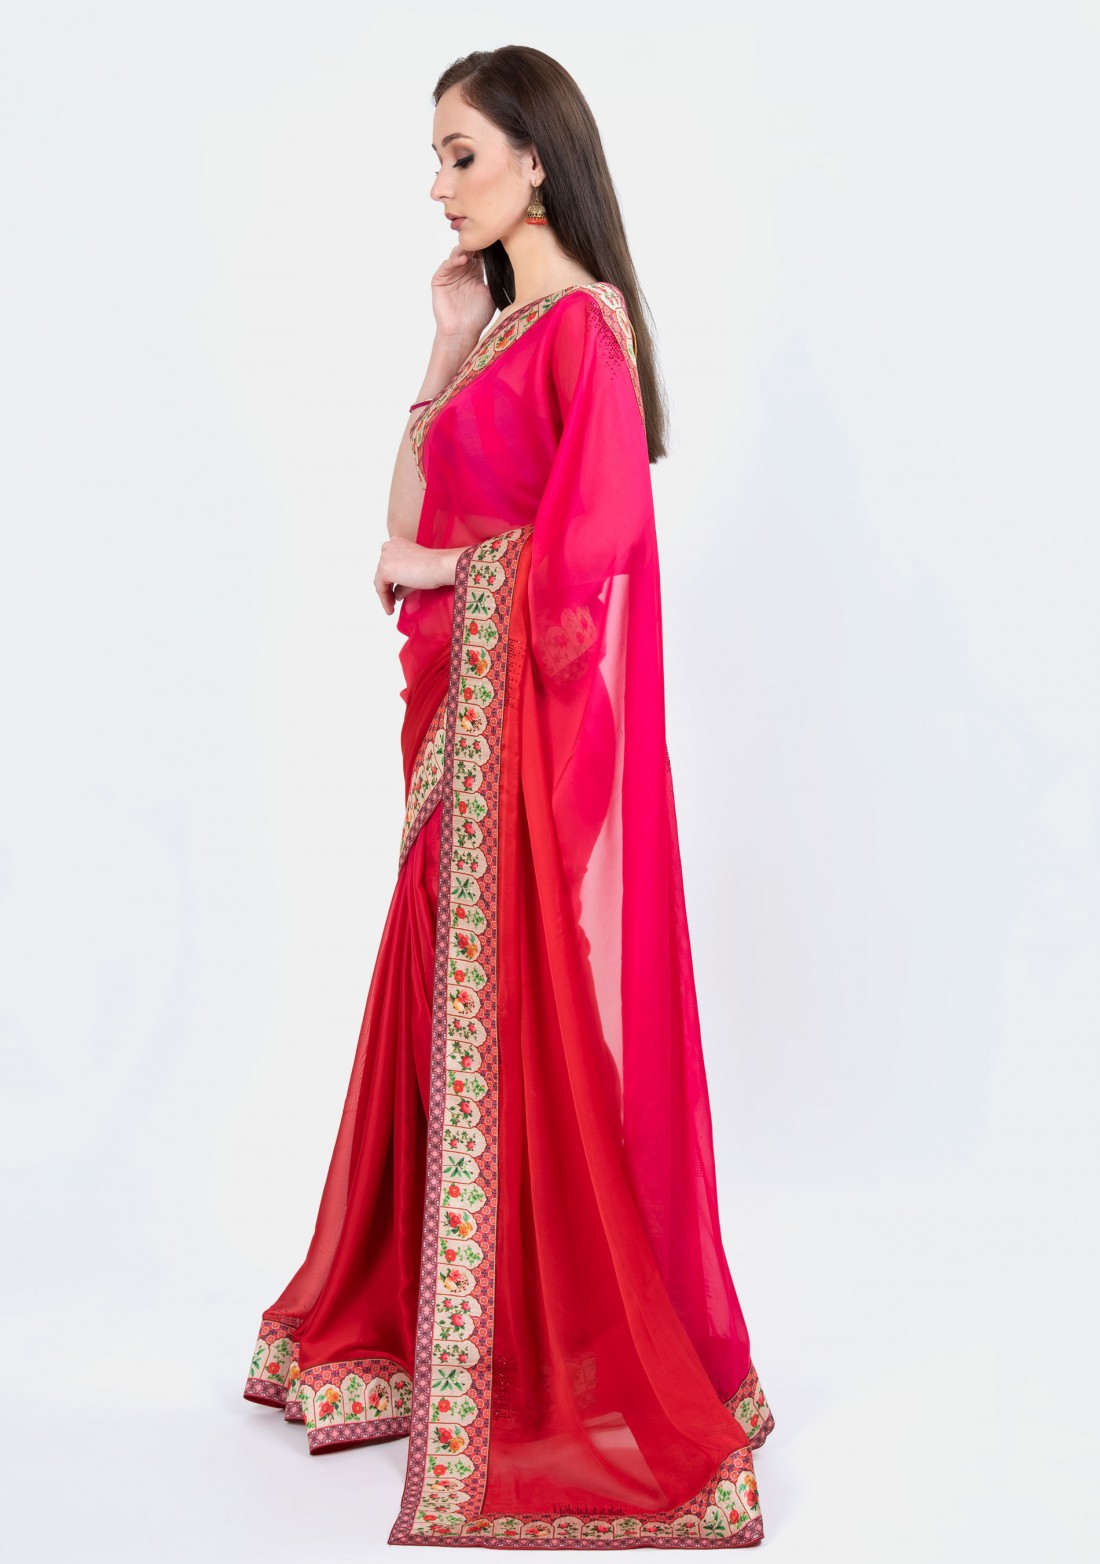 Gorgeous Red and Pink Dual Tone Georgette Saree